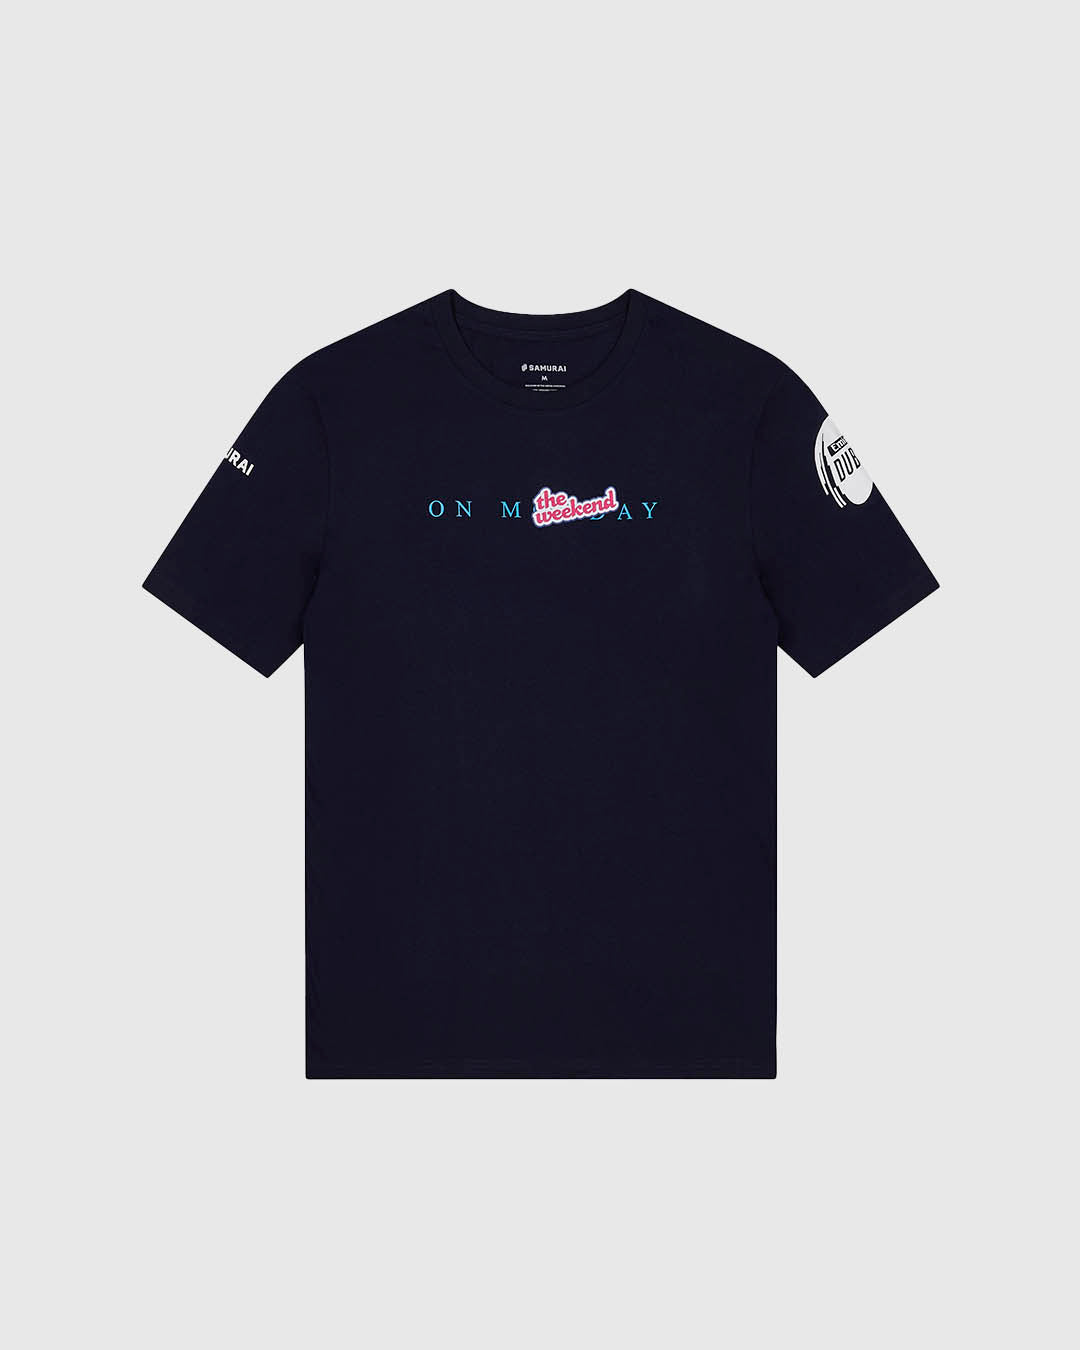 ED7:00 - On The Weekend T-Shirt - Navy